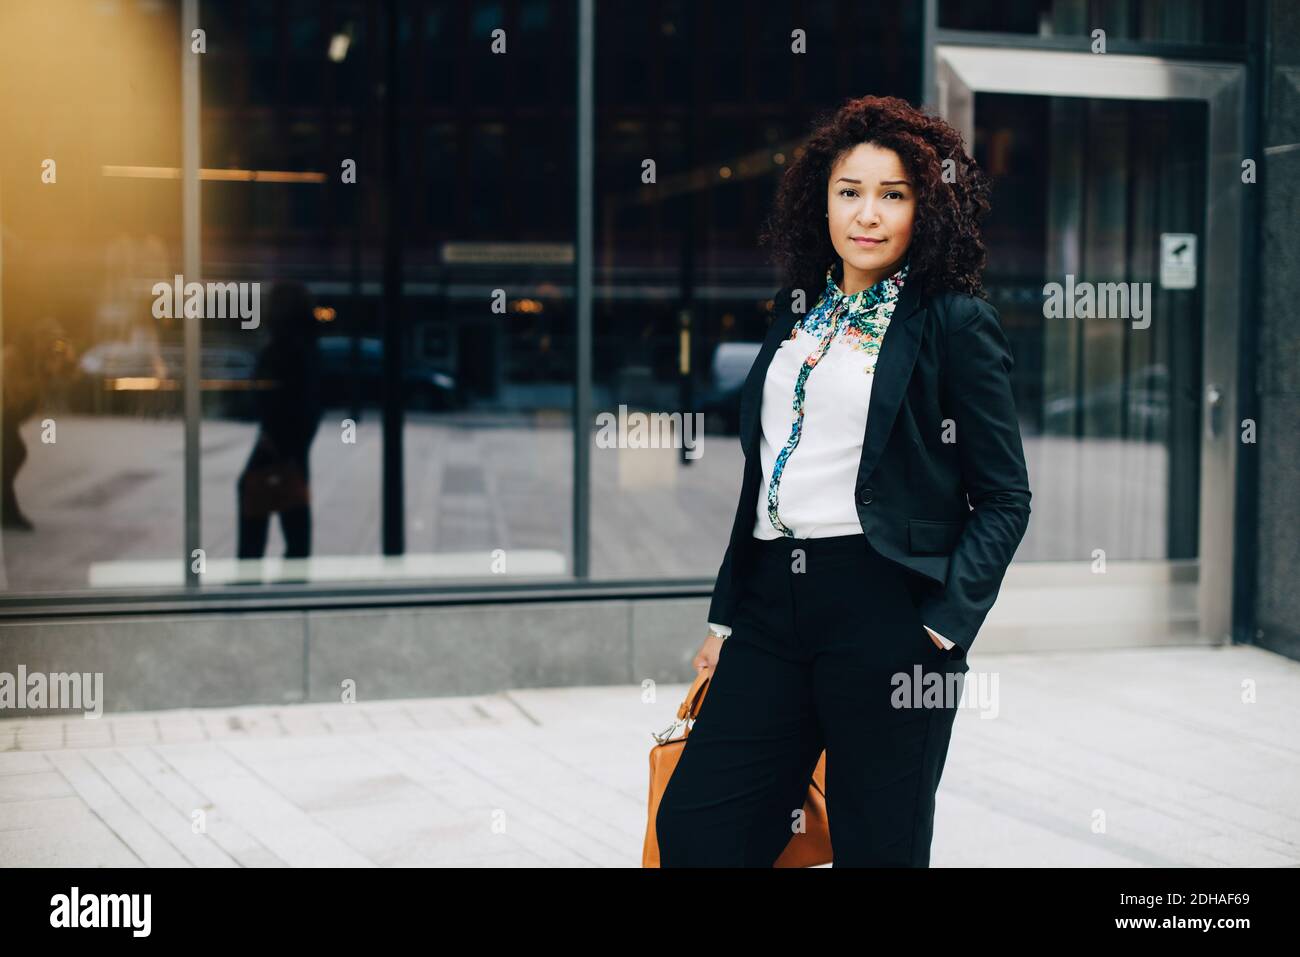 Portrait of confident businesswoman standing against building in city Stock Photo